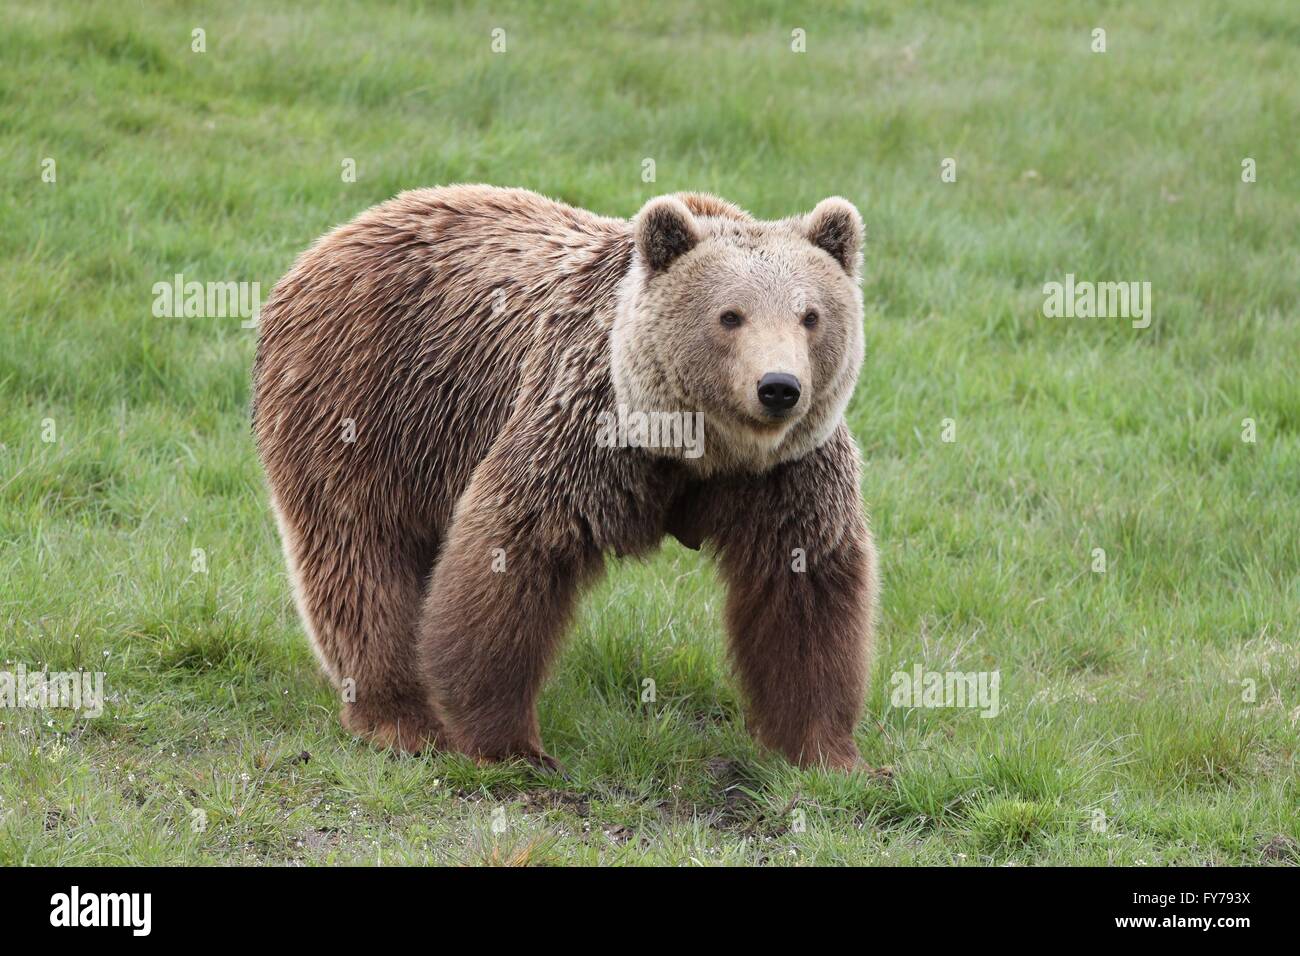 Brown bear in the nature Stock Photo